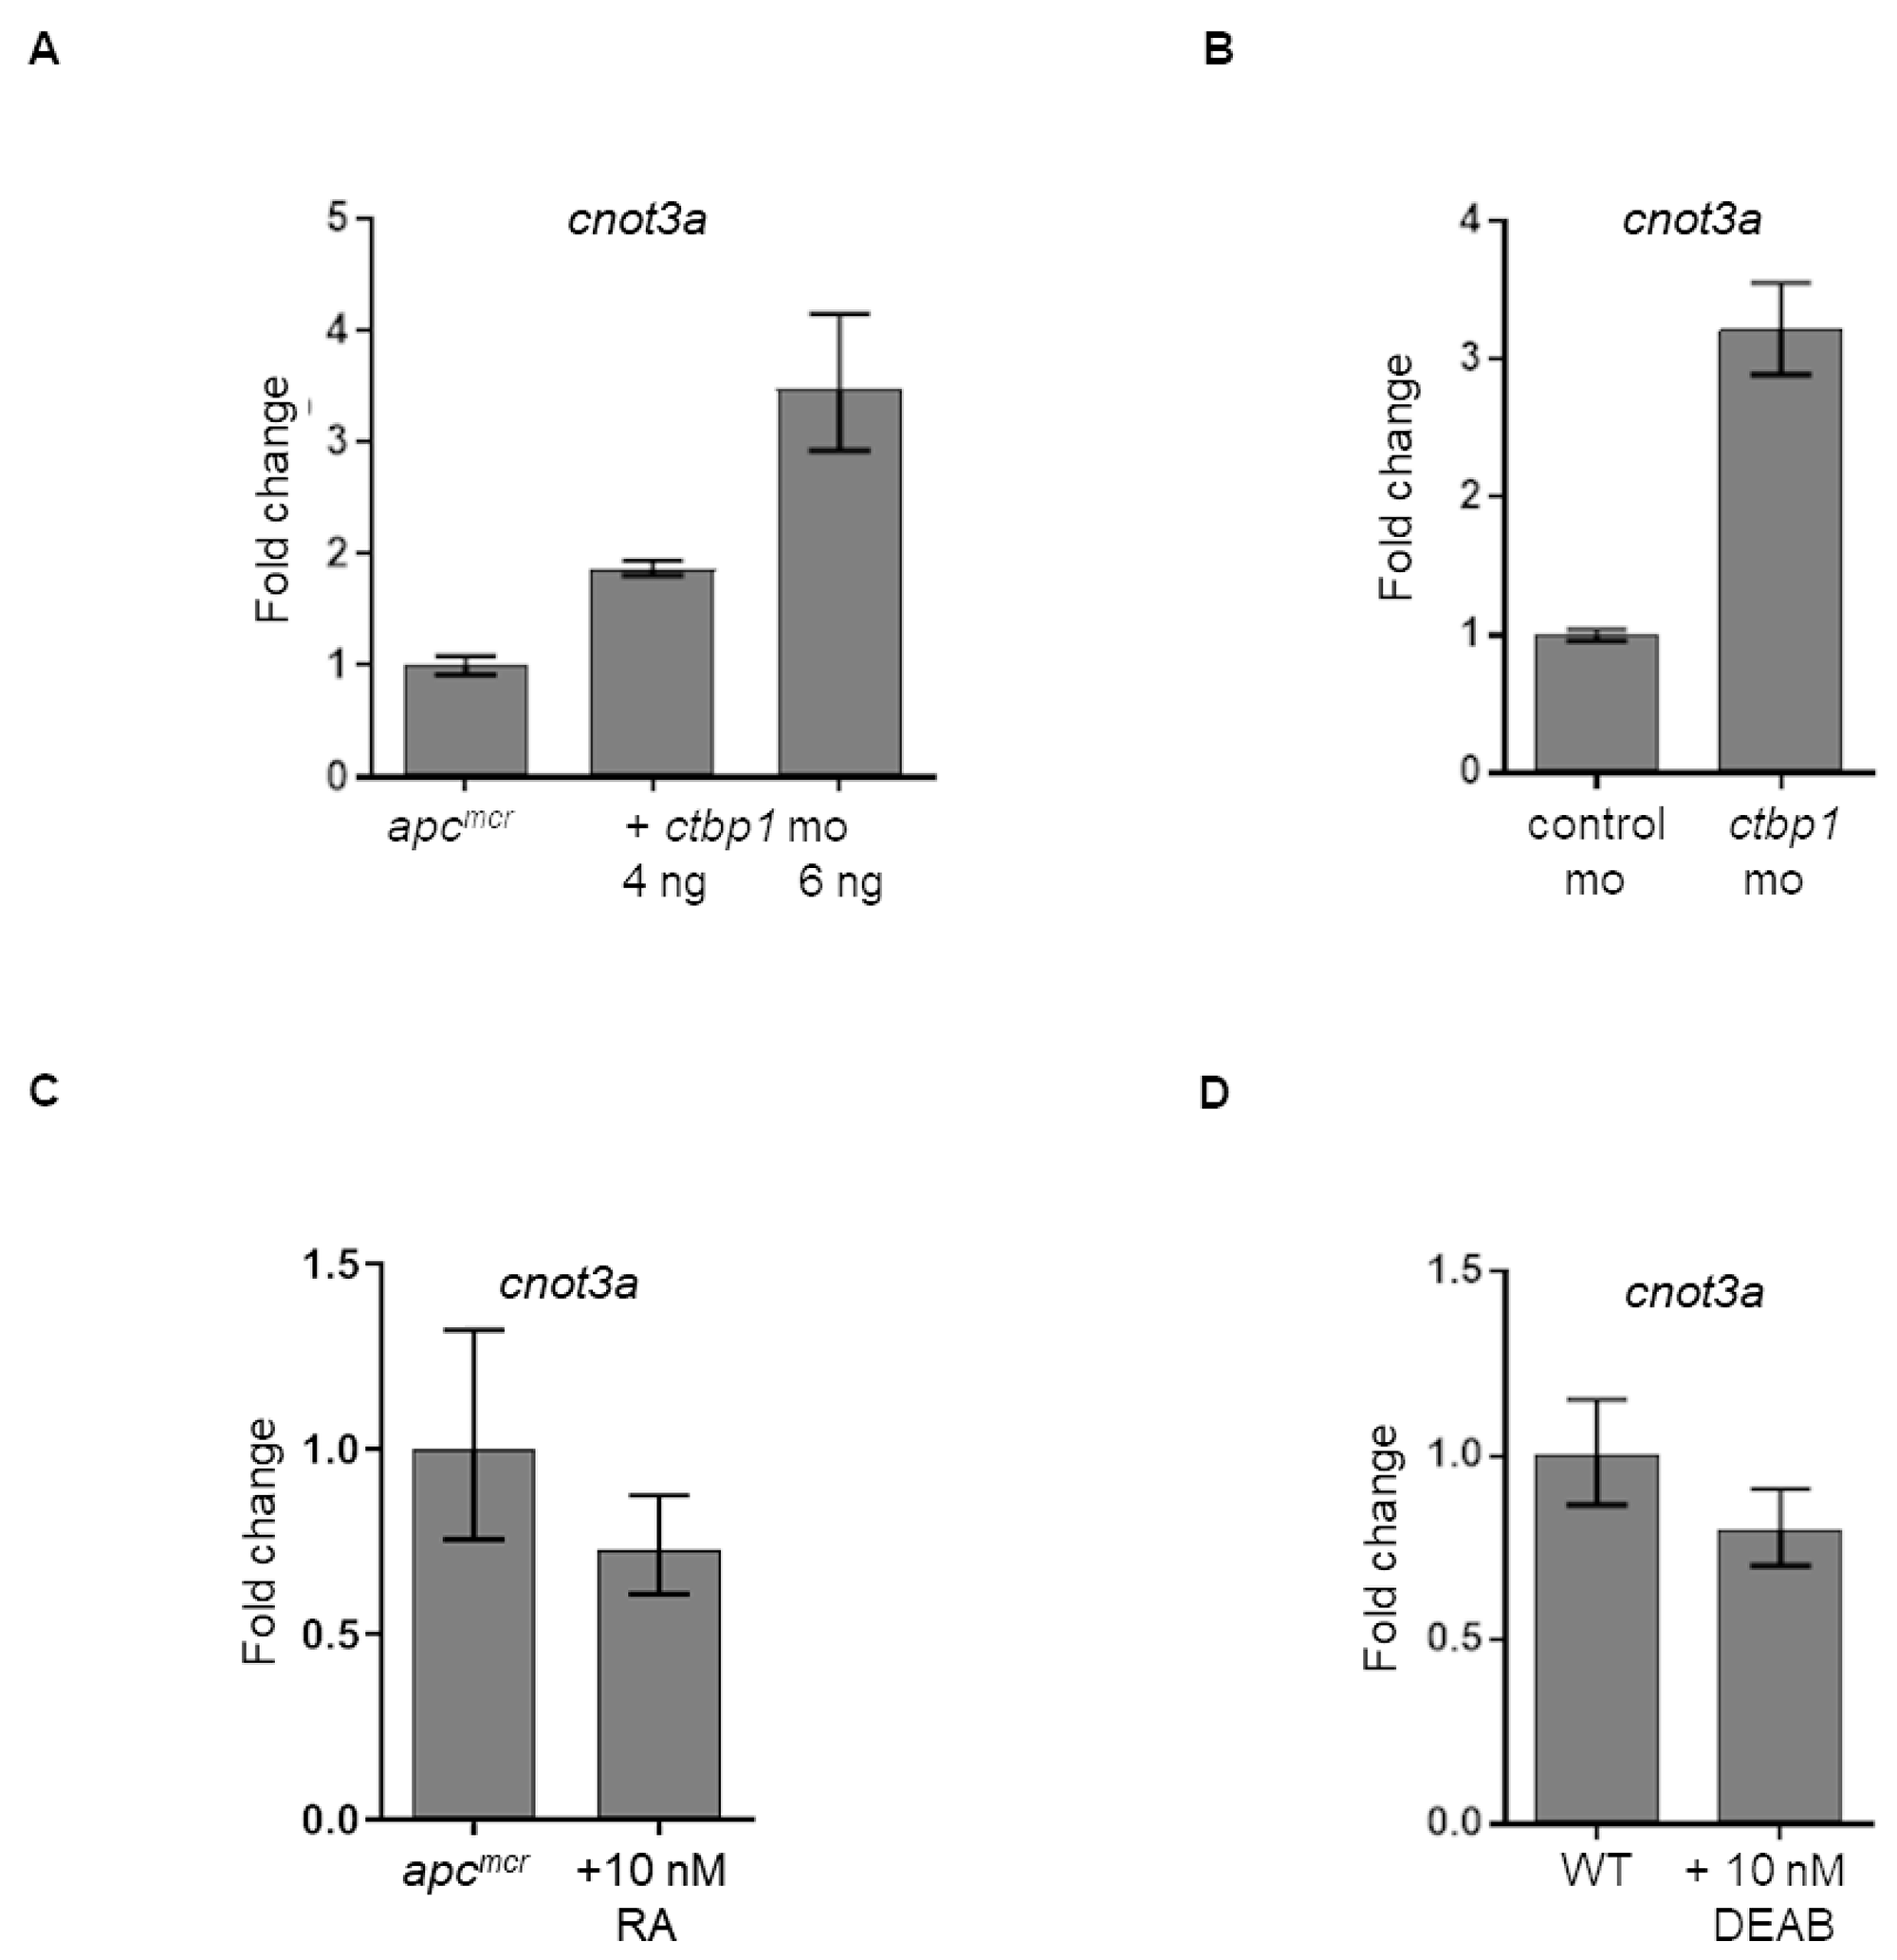 Regulation of cnot3a expression by ctbp1.